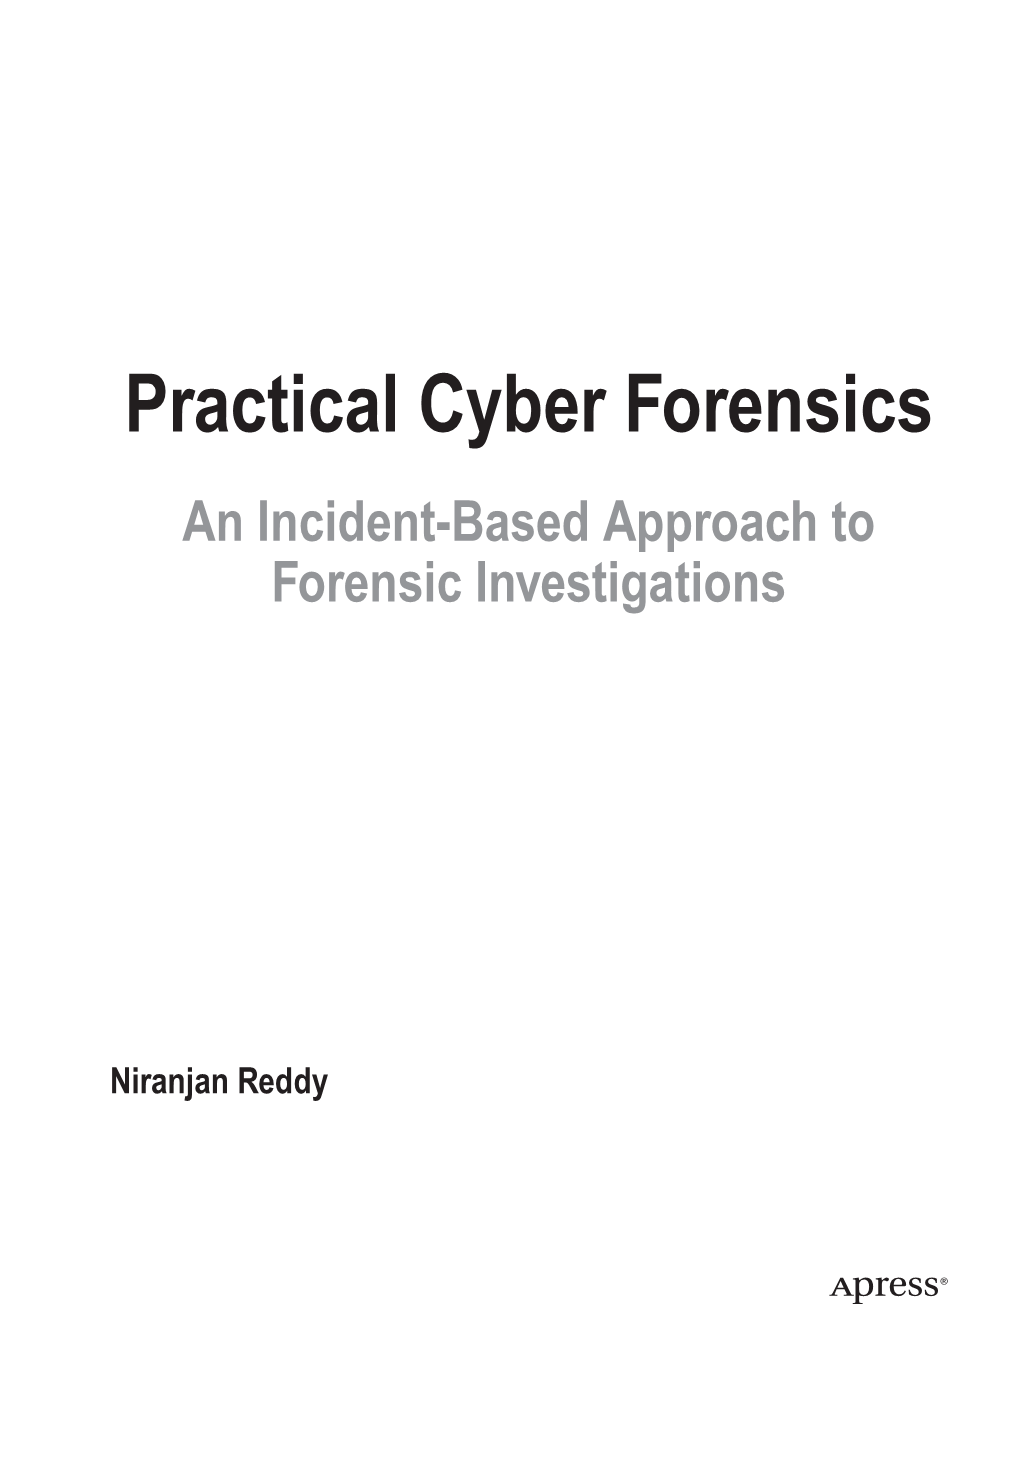 Practical Cyber Forensics an Incident-Based Approach to Forensic Investigations